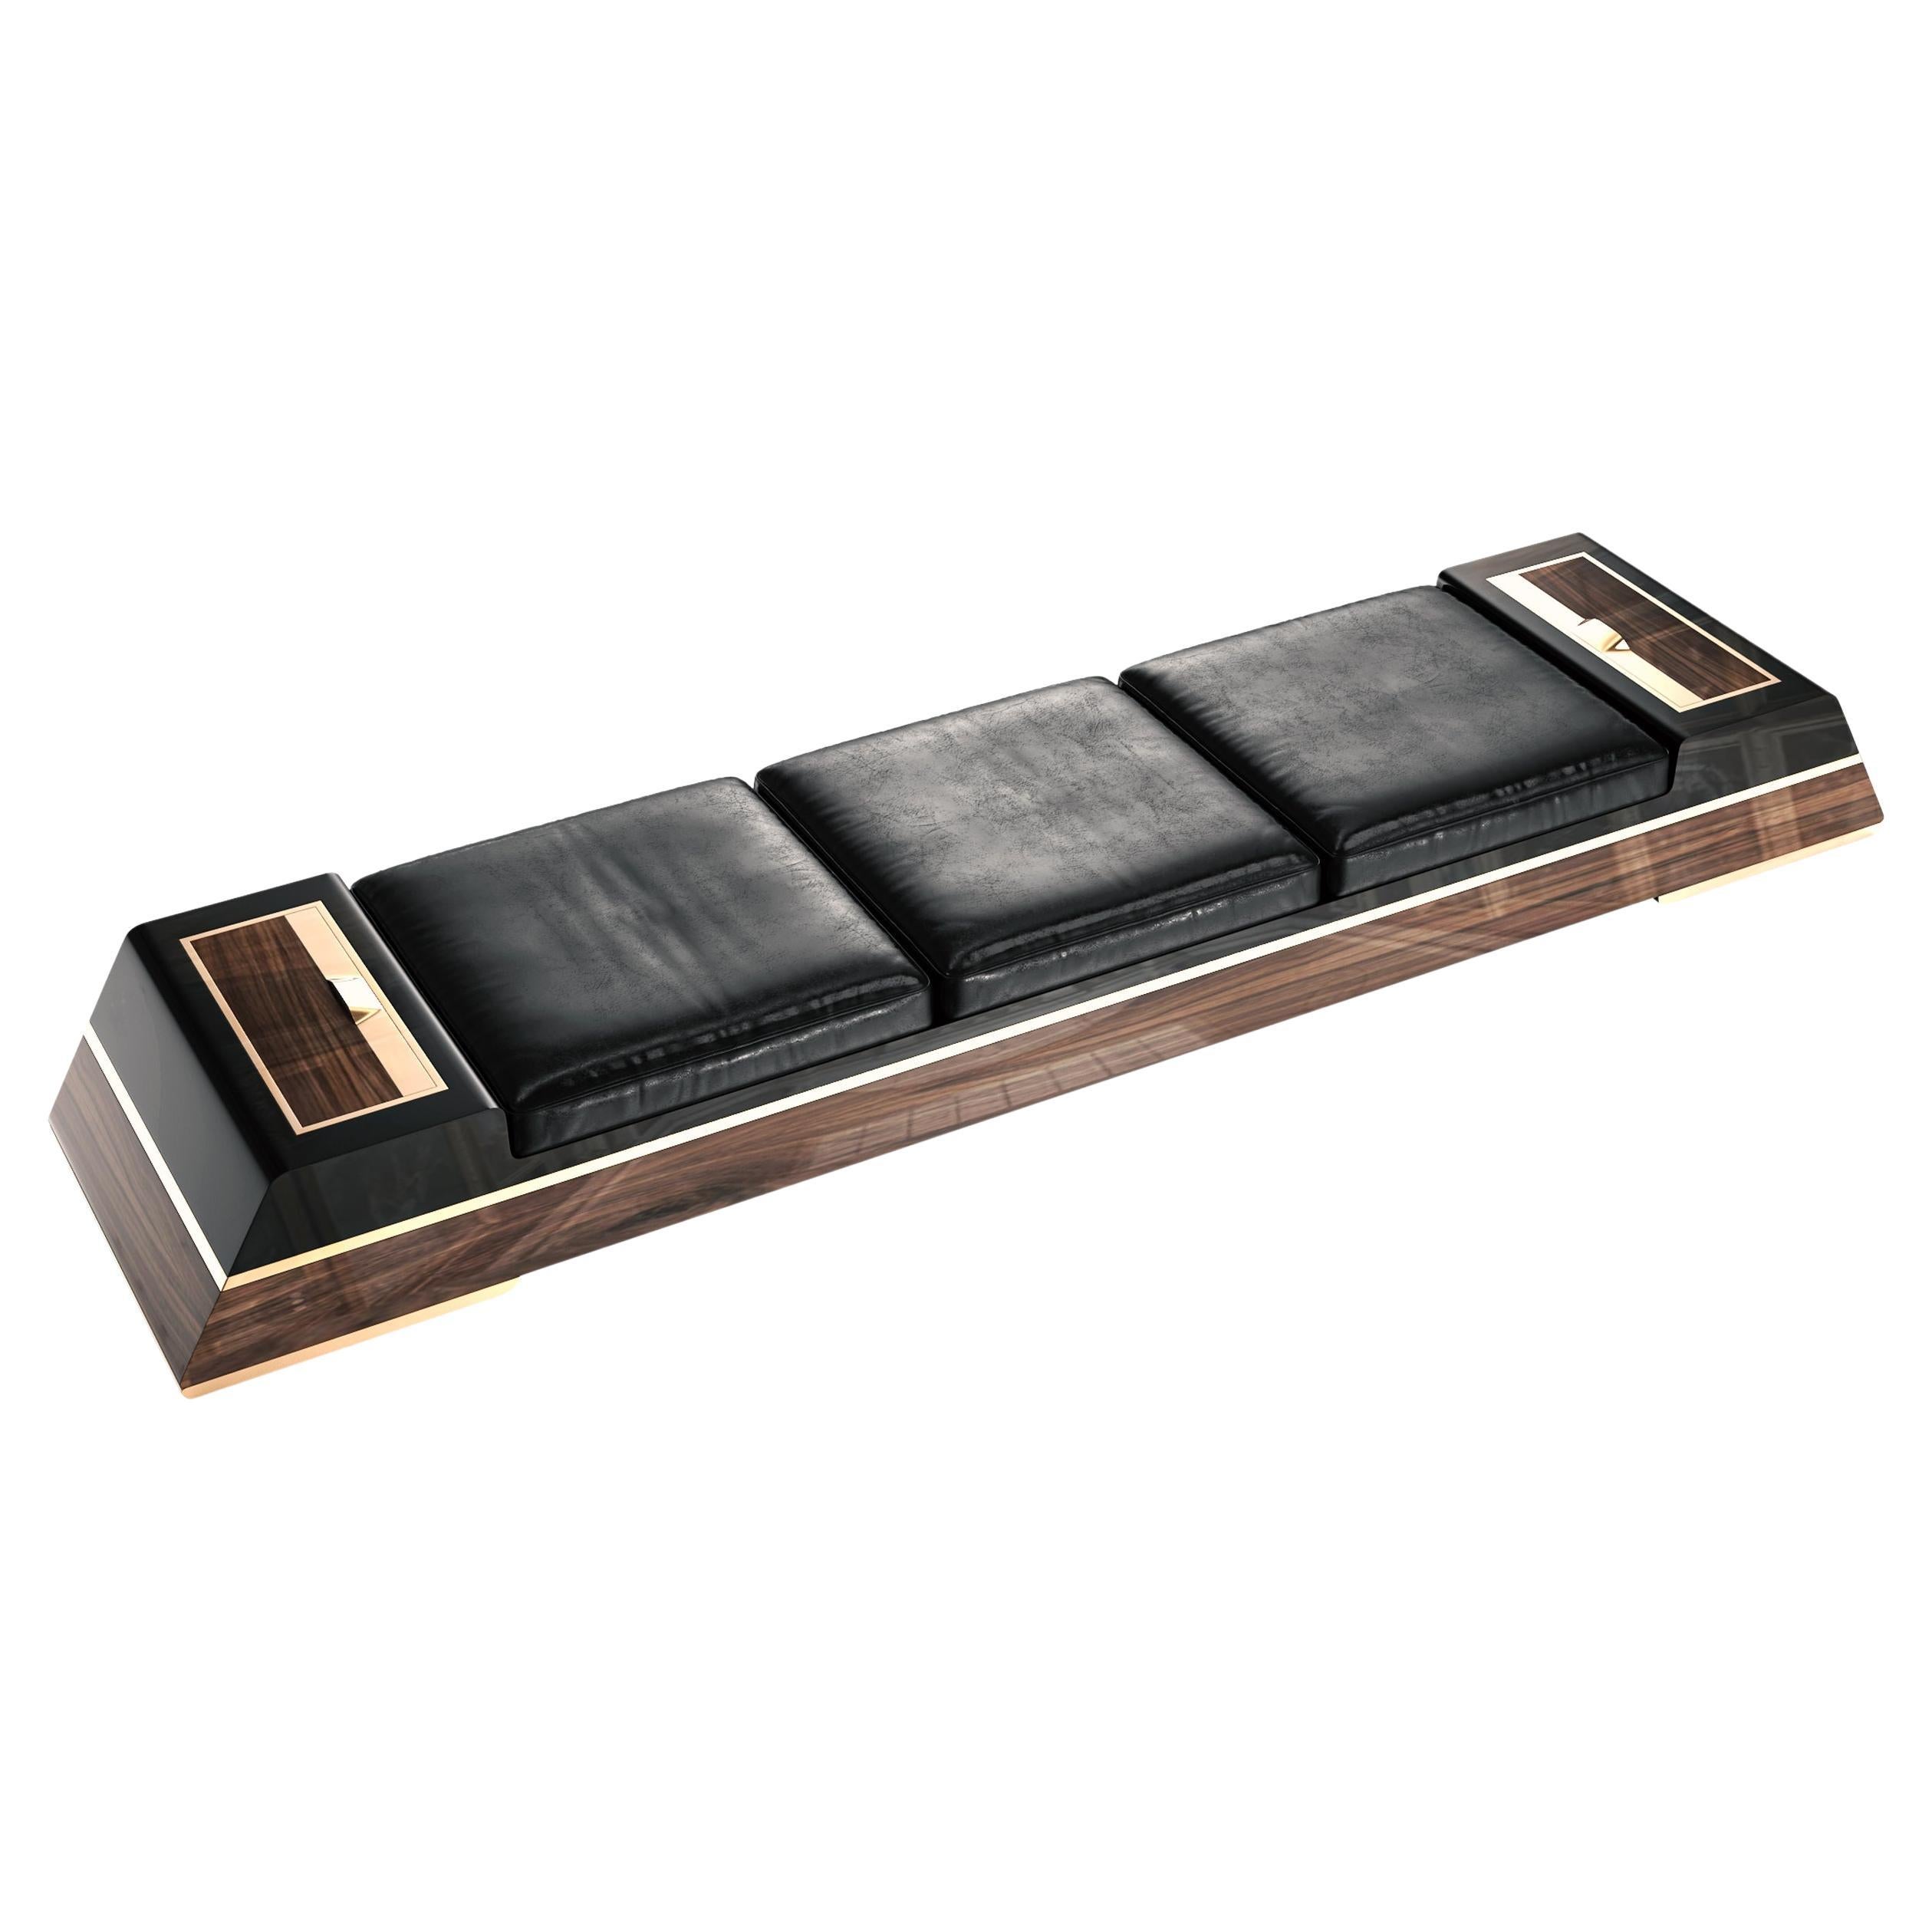 "Calamità" Daybed with Walnut, Stainless Steel and Bronze Details, Istanbul For Sale